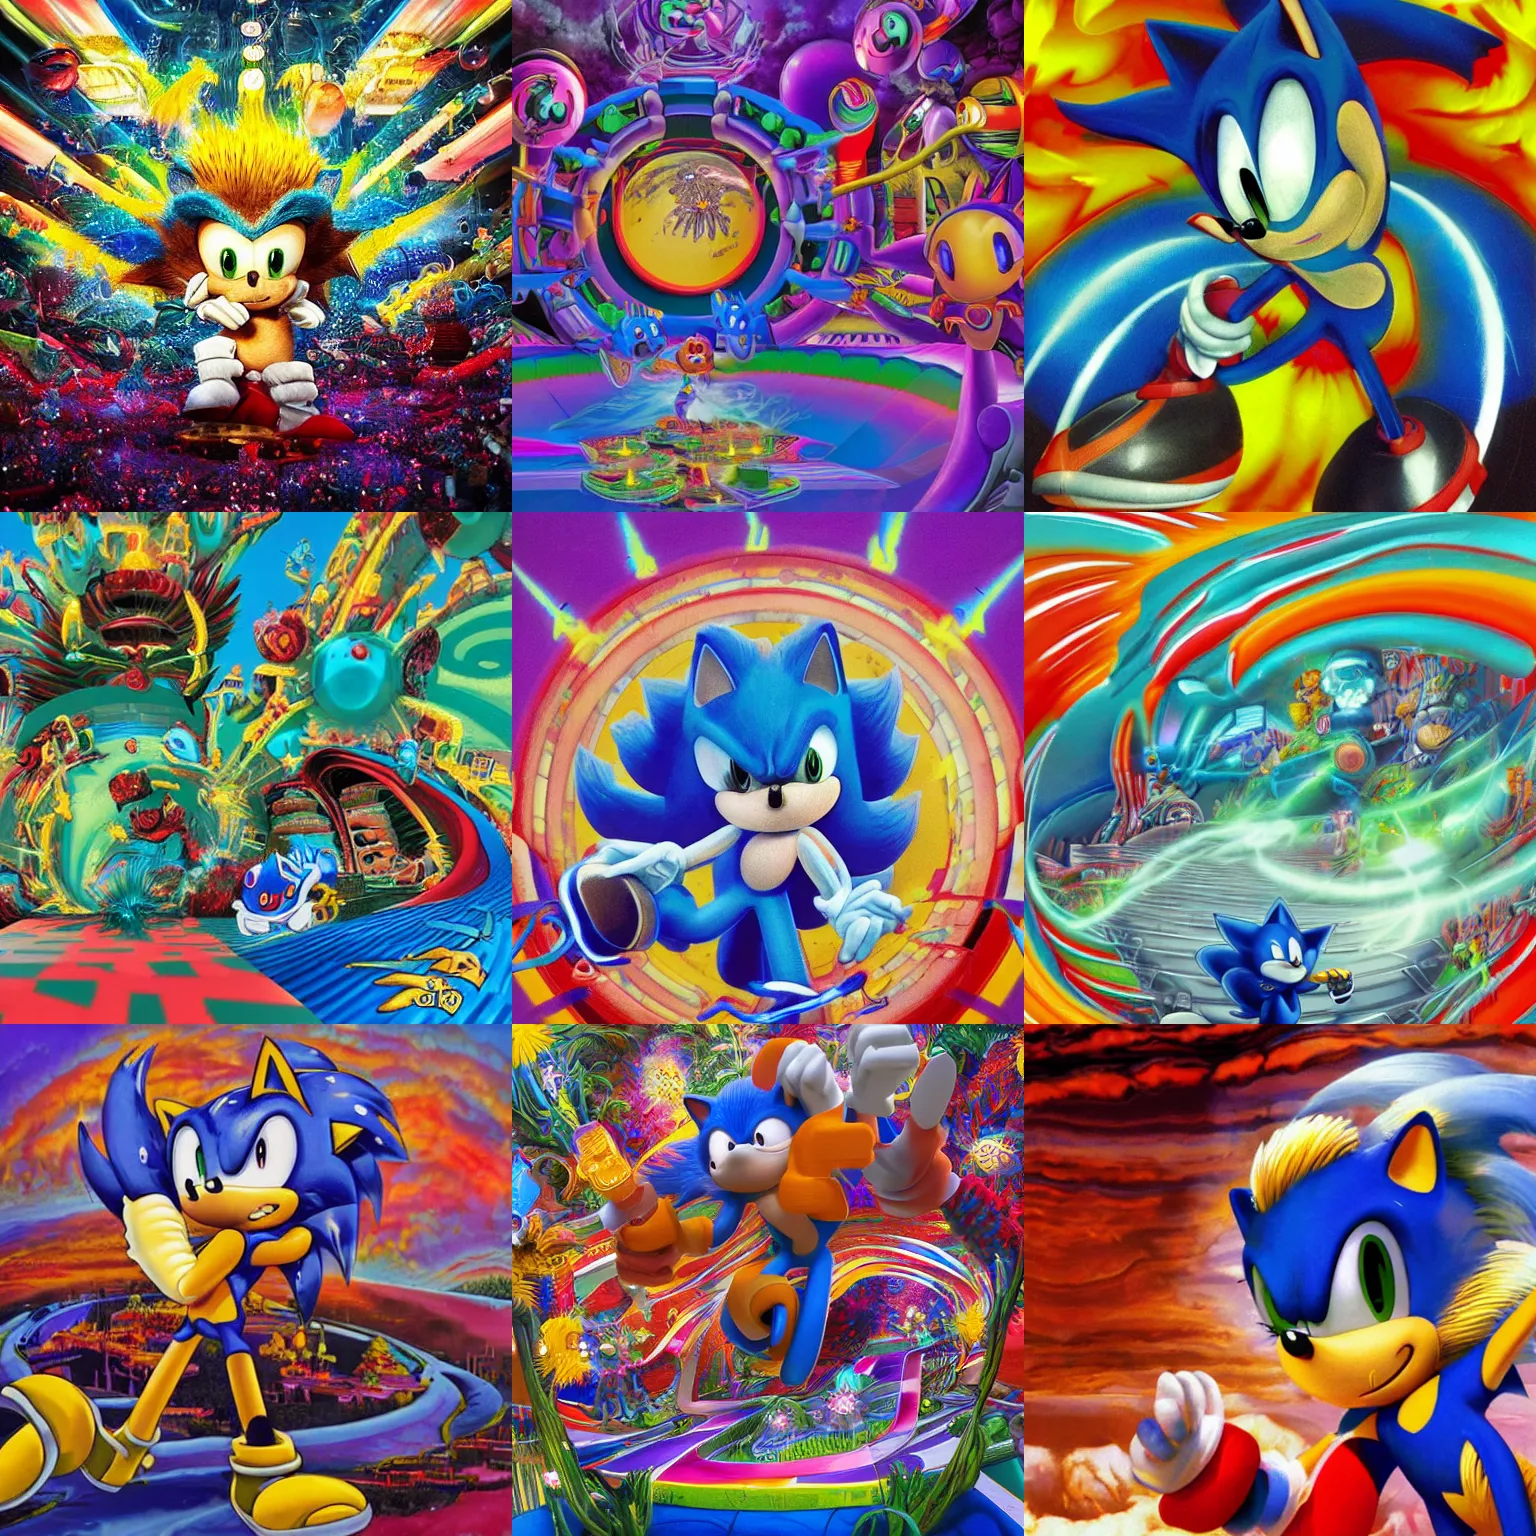 Prompt: close up retro sonic the hedgehog in a surreal, soft, ornate, professional, high quality airbrush art mgmt shpongle album cover of a chrome dissolving LSD DMT blue sonic the hedgehog surfing through vaporwave caves, checkerboard horizon , 1980s 1982 Sega Genesis video game album cover